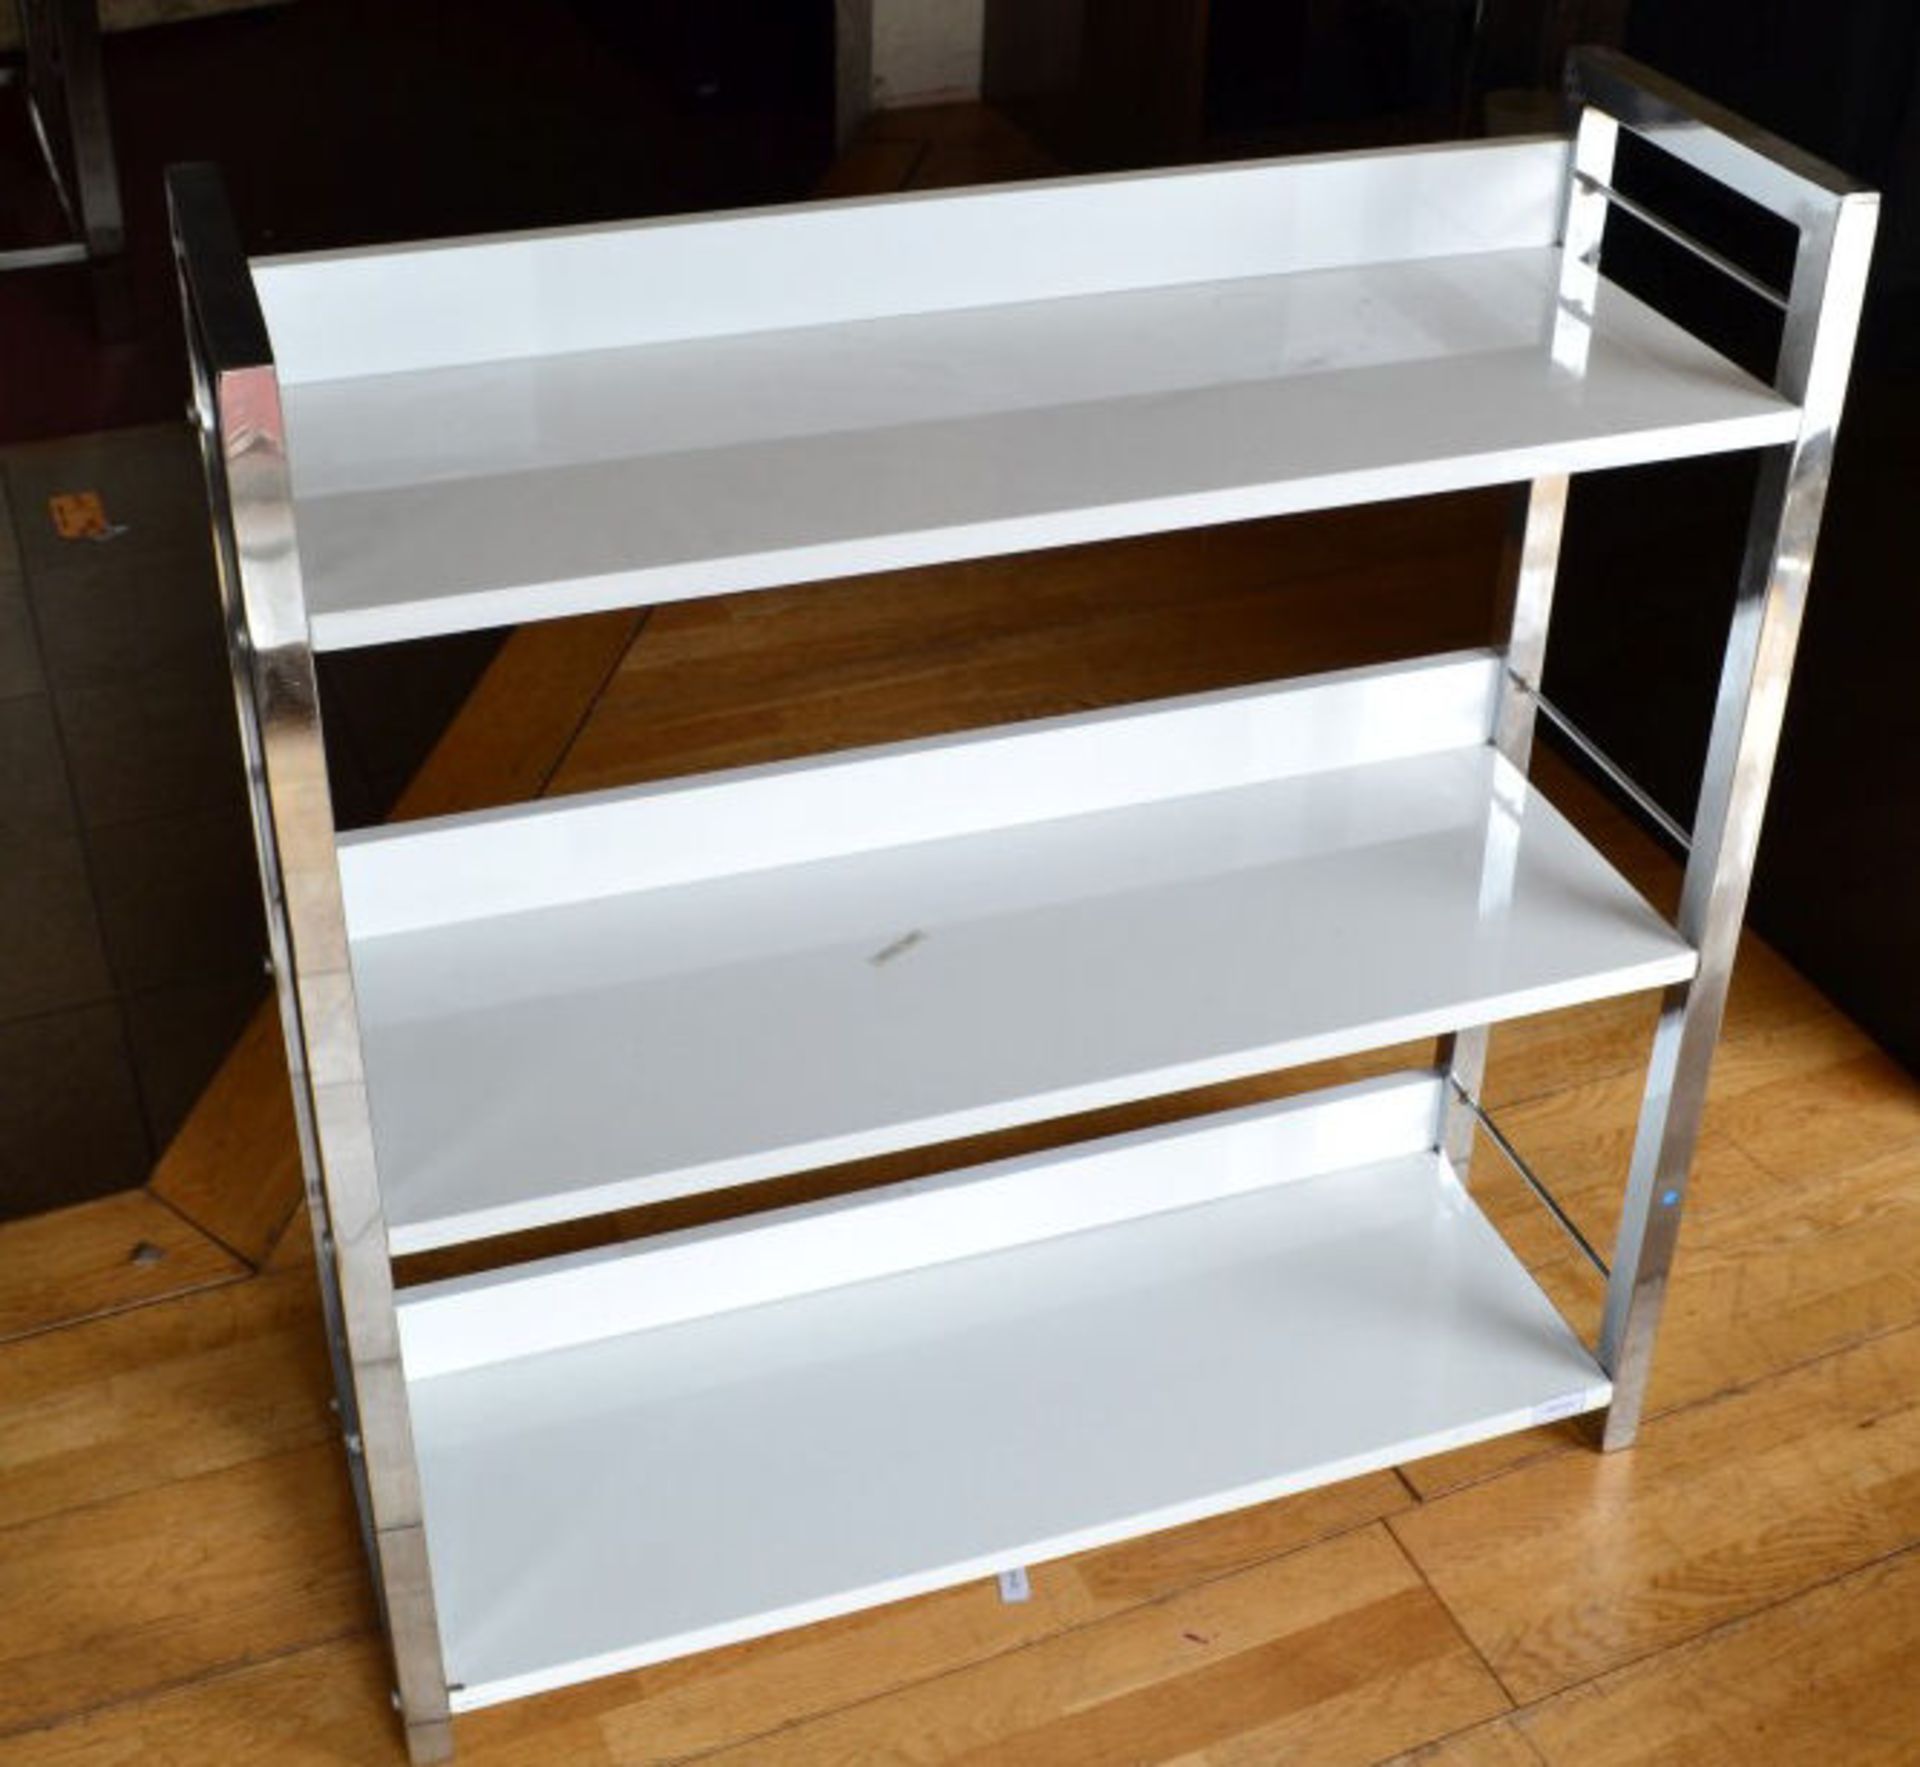 1 x Modern White And Silver 3 Tier Shelf Unit - Image 3 of 5